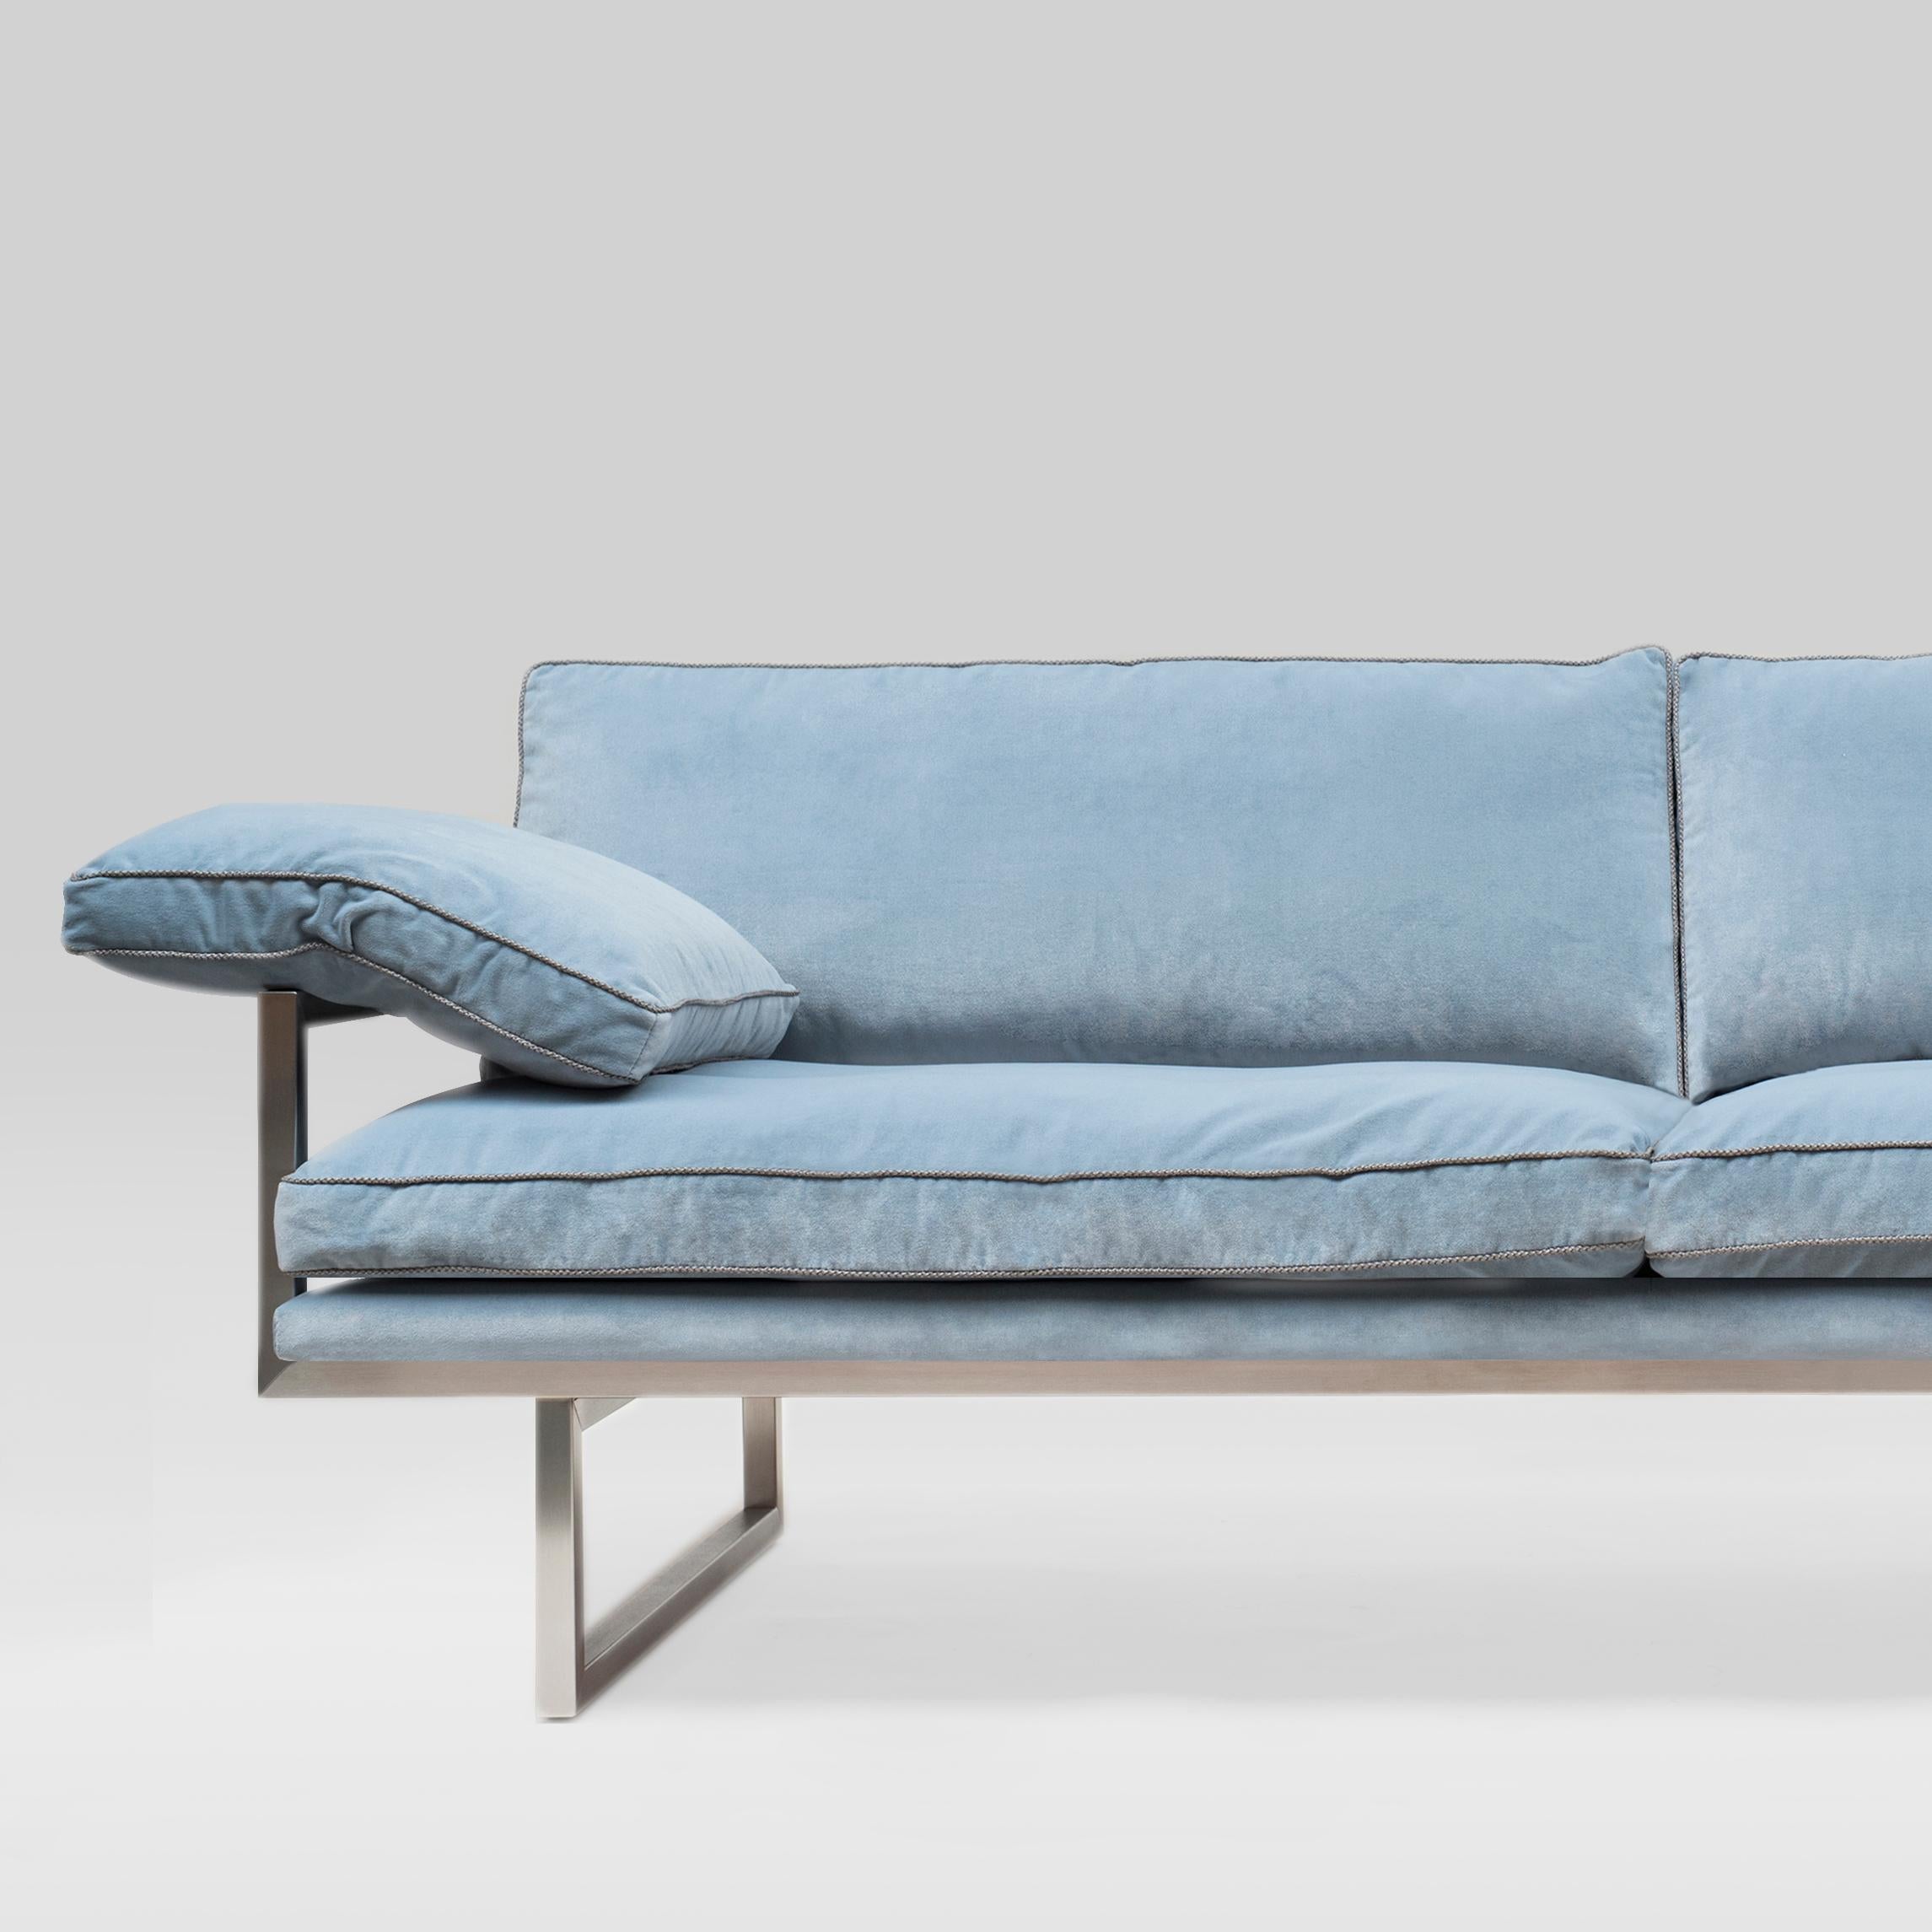 Sofa designed by Peter Ghyczy in 2009.
Manufactured by Ghyczy (Netherlands)

This sofa has an airy and light weight architectural construction. The GP01 is designed with an adjustable backrest, which allows to adjust the seat depth.

Material and